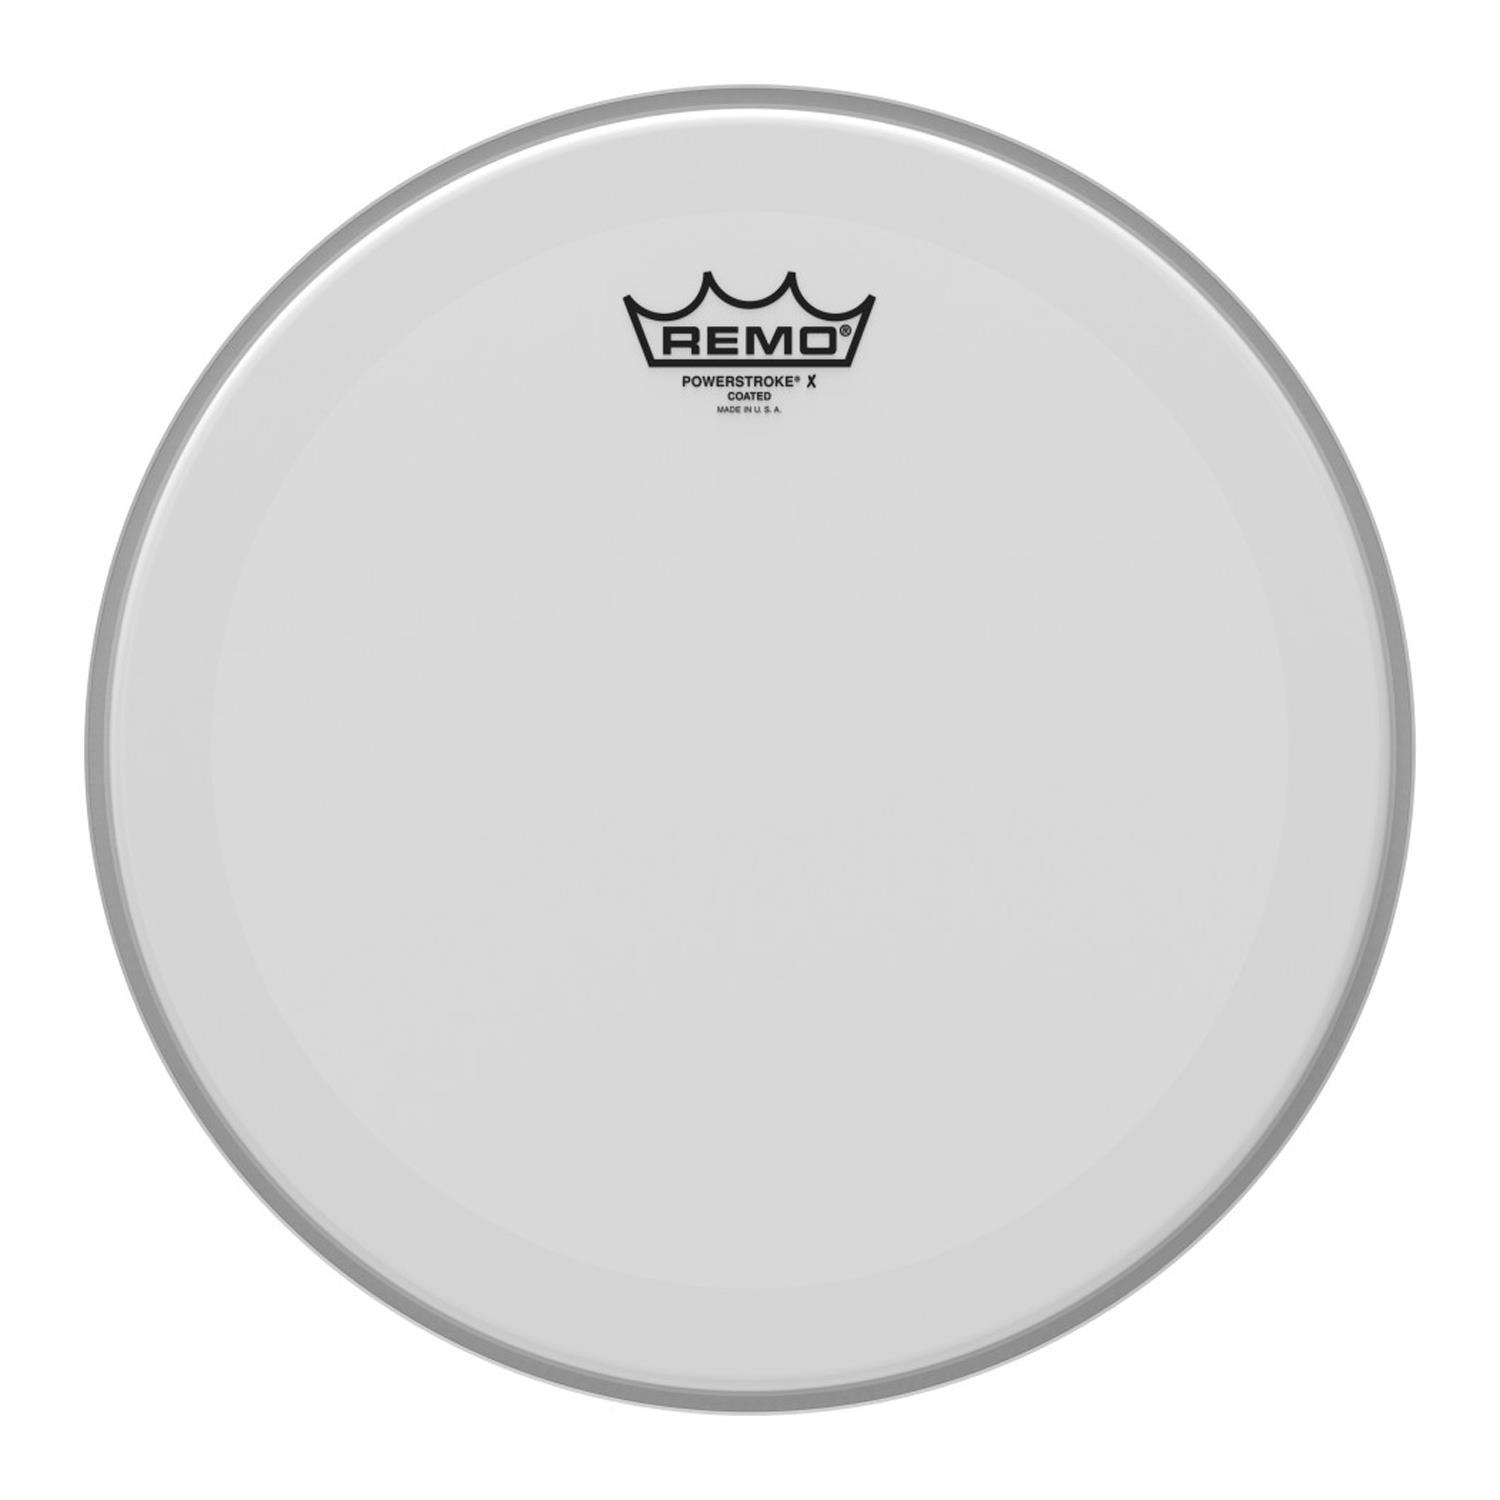 Remo PX-0113-BP 13" Powerstroke X Snare Drum Head - DY Pro Audio